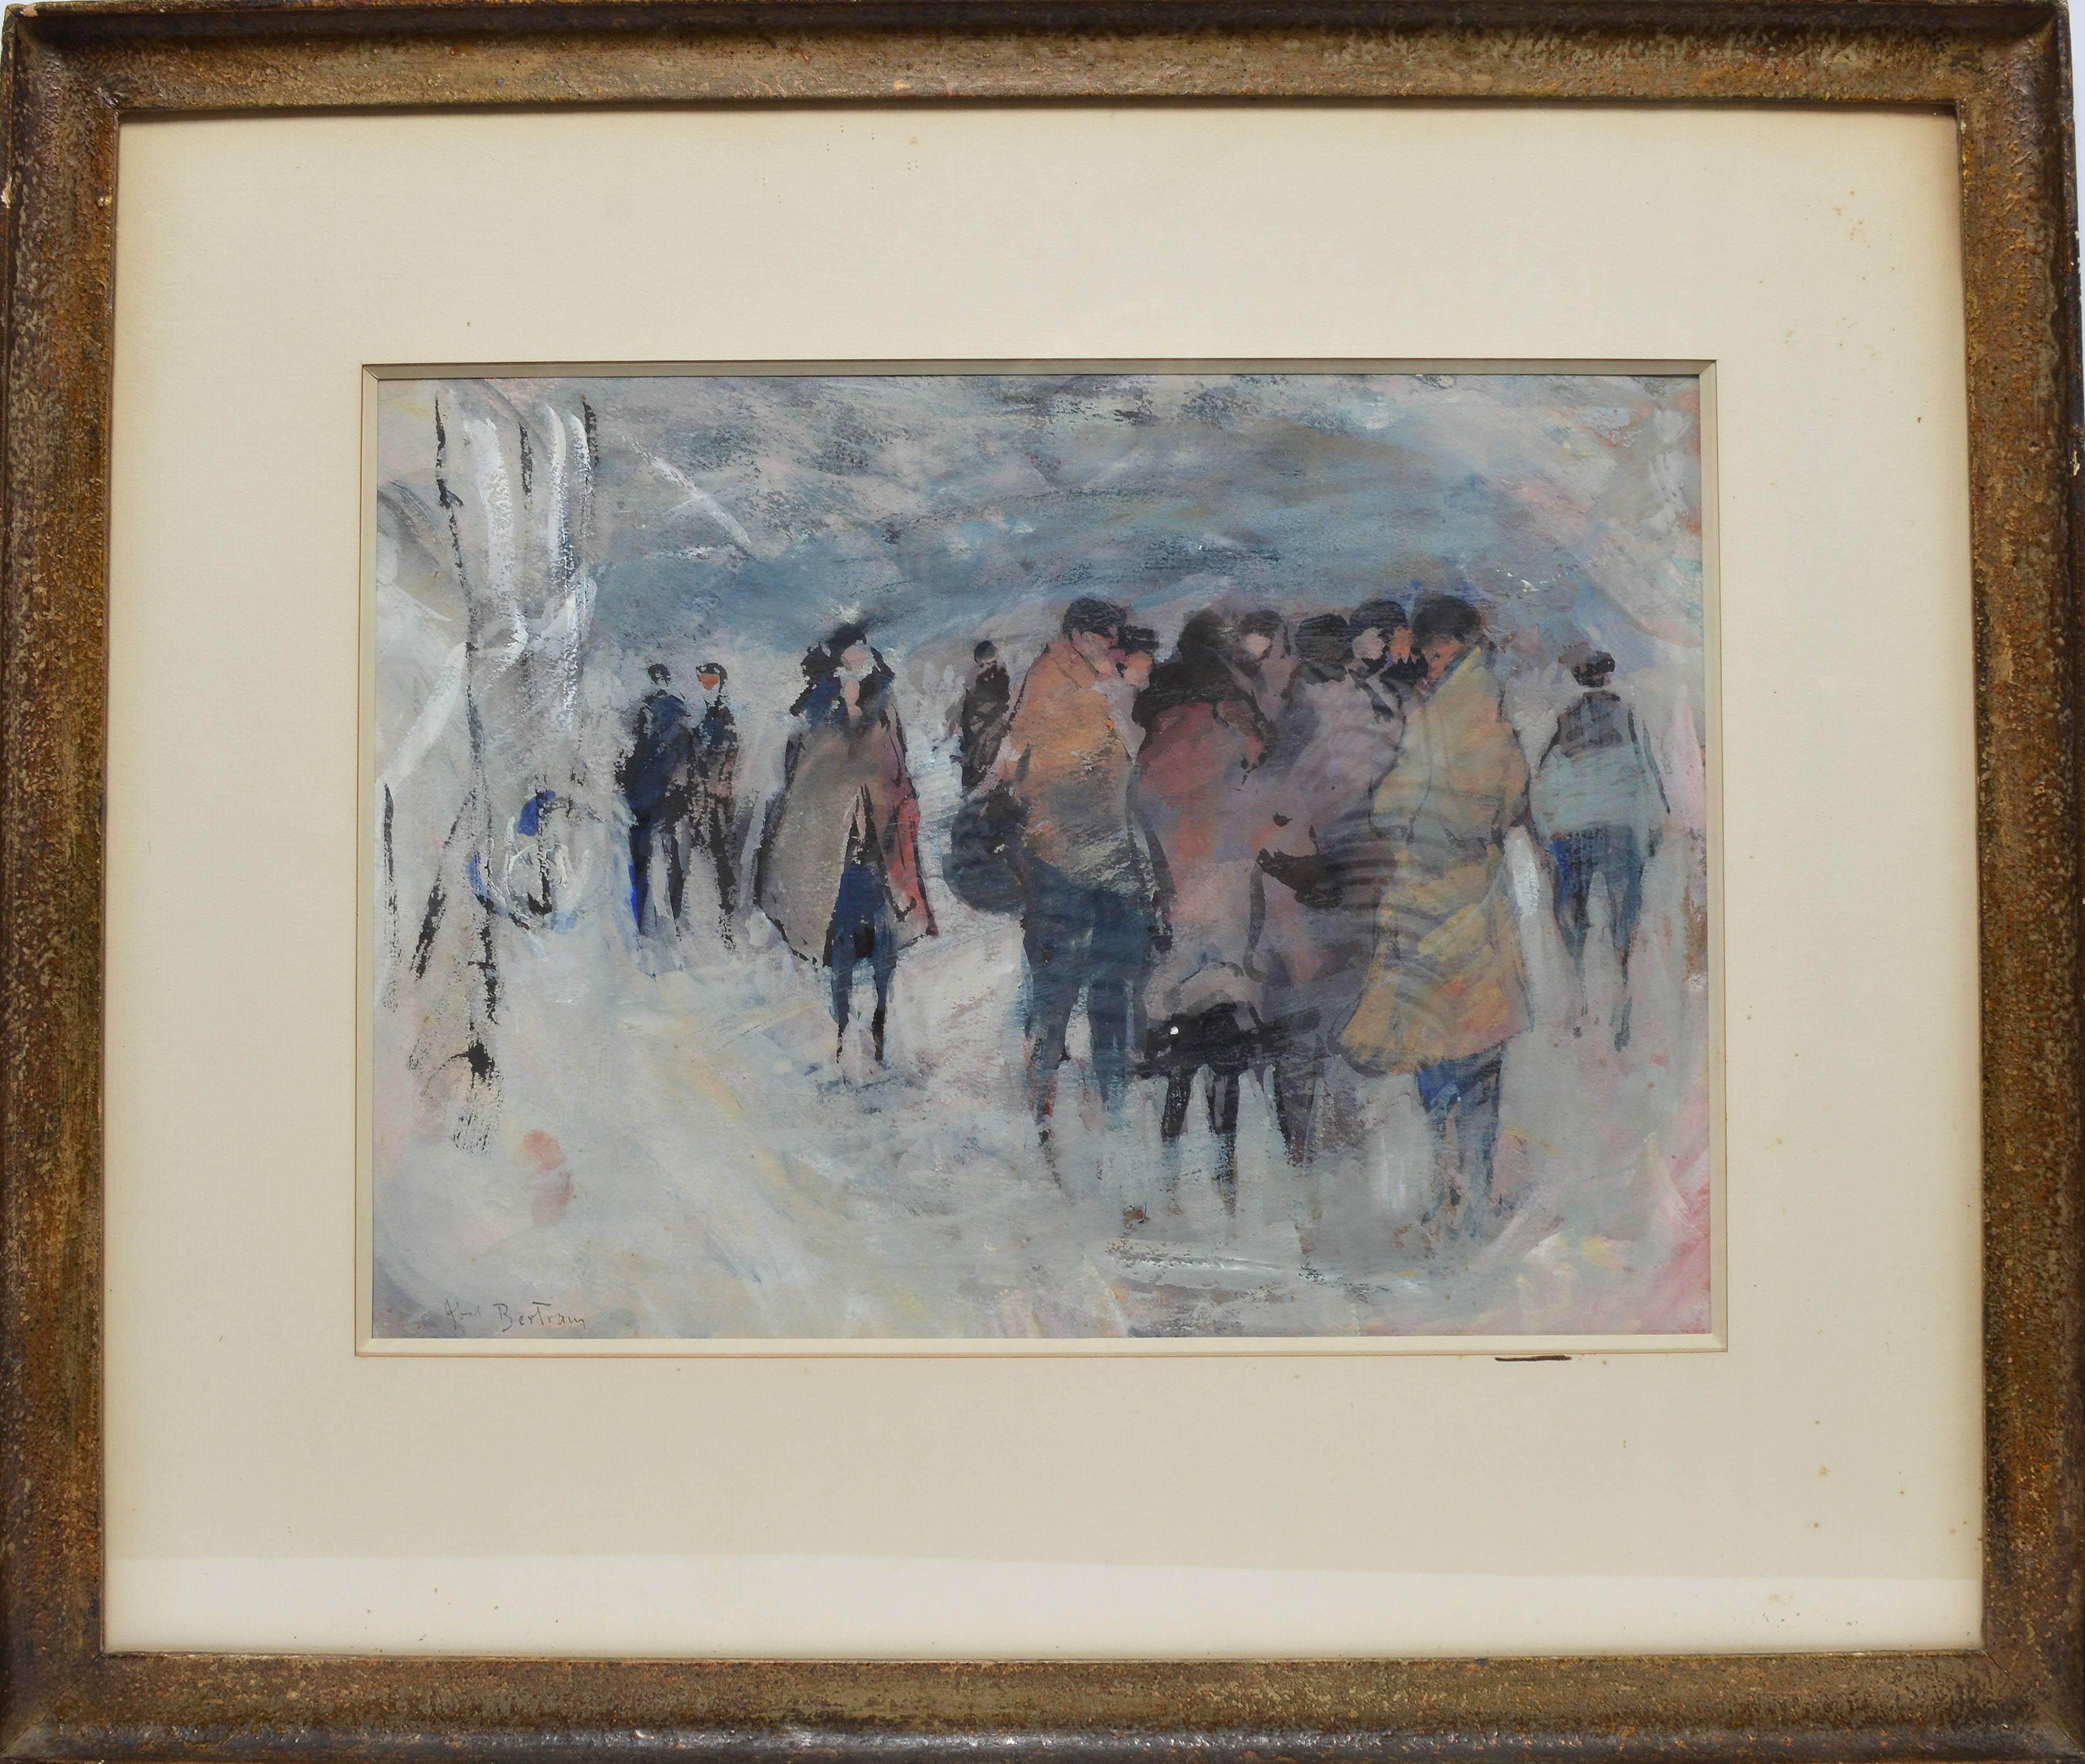 Modernist winter landscape with figures by Abel Bertram  (1871 - 1954).  Watercolor and gouache on paper, circa 1920.  Signed lower left, "Abel Bertram".  Displayed in a brown wood frame, cream mat and behind glass.  Image size, 15"L x 11"H, overall